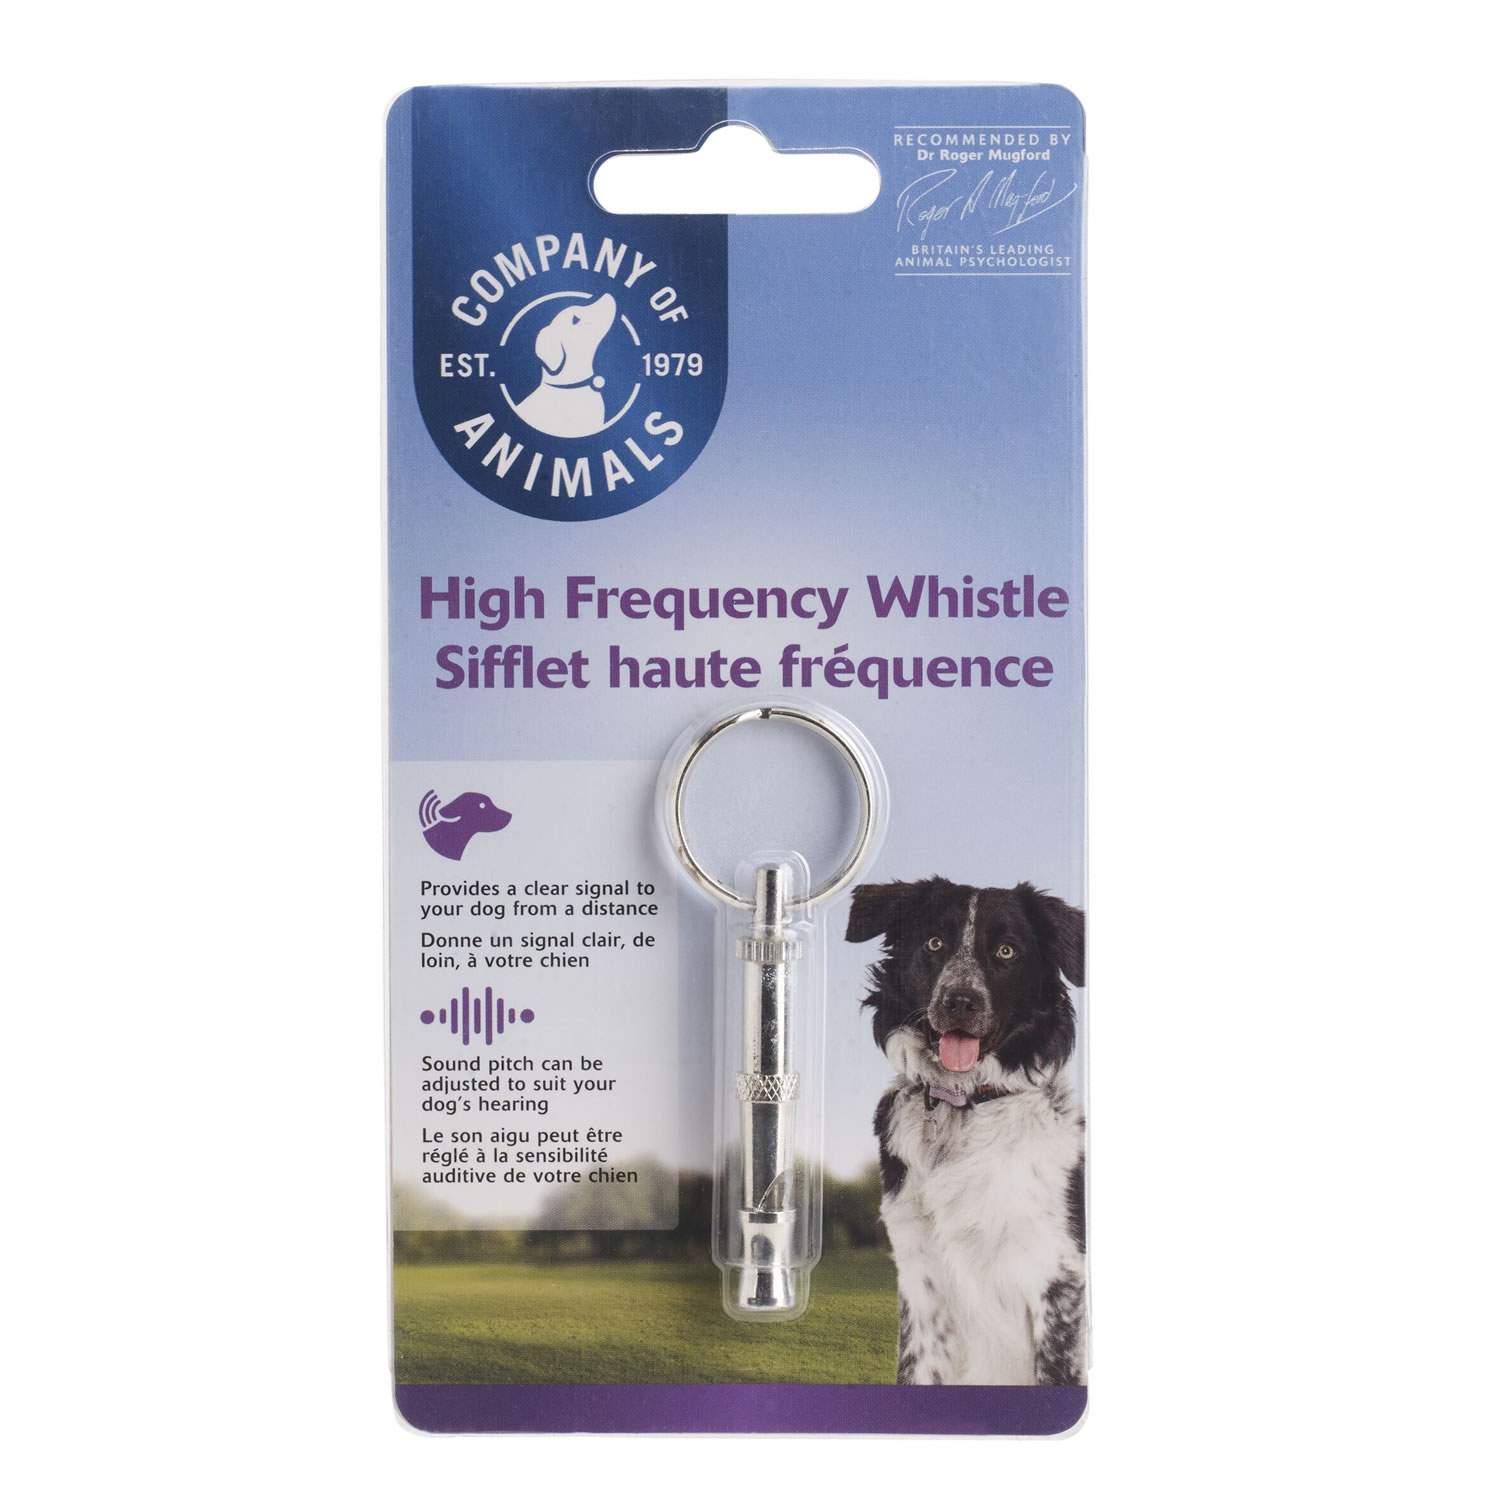 CO OF ANIMALS HIGH FREQUENCY WHISTLE